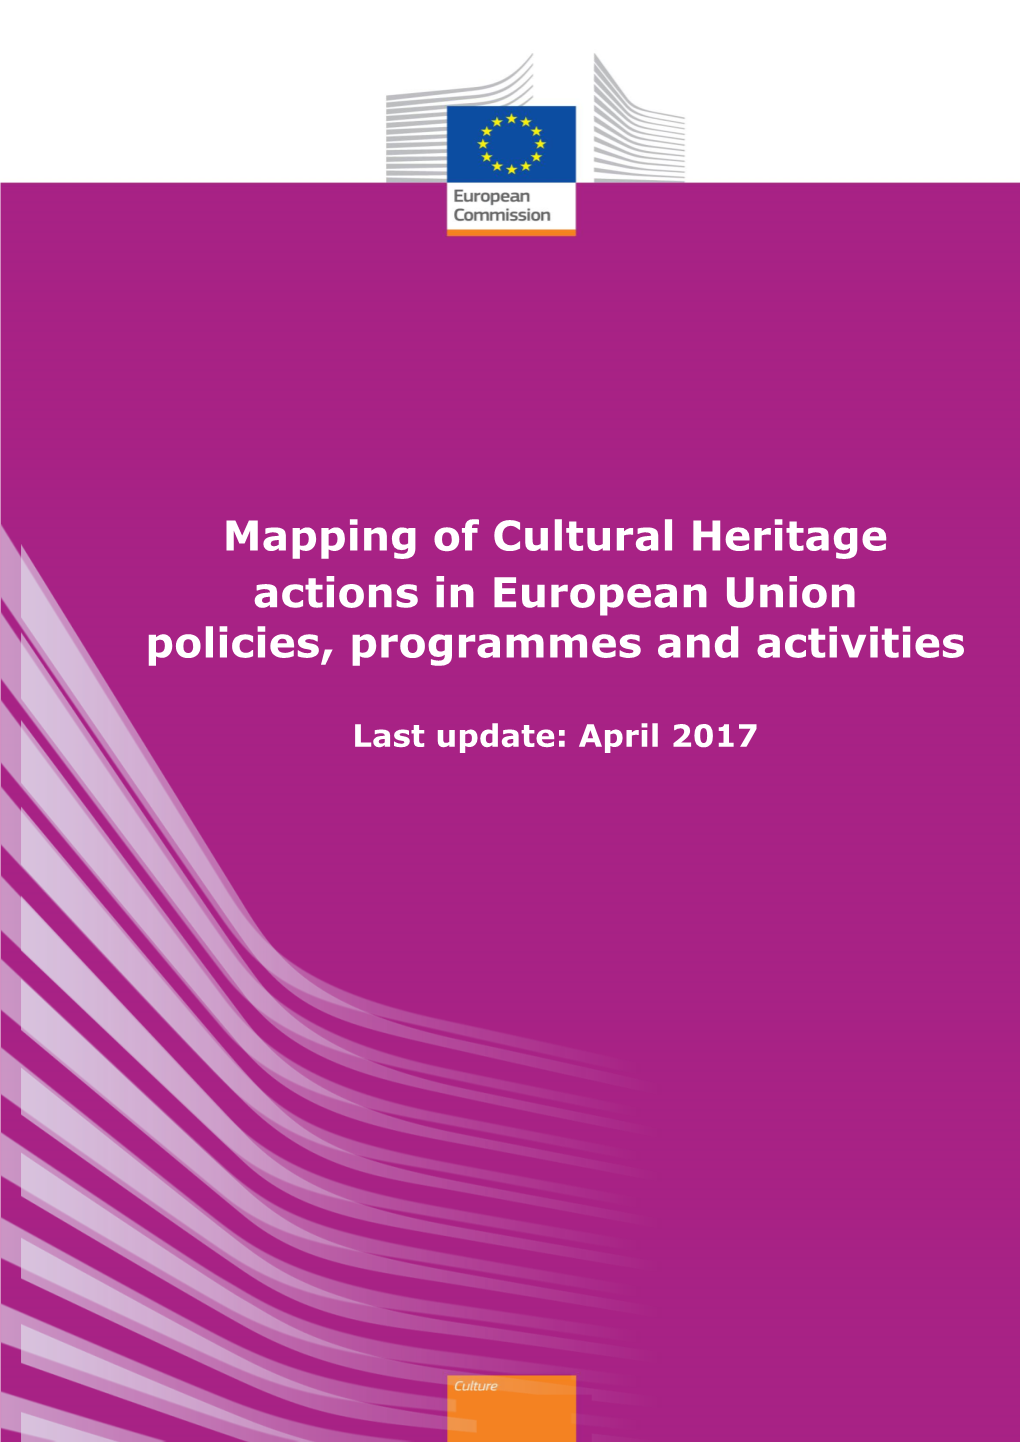 Mapping of Cultural Heritage Actions in European Union Policies, Programmes and Activities